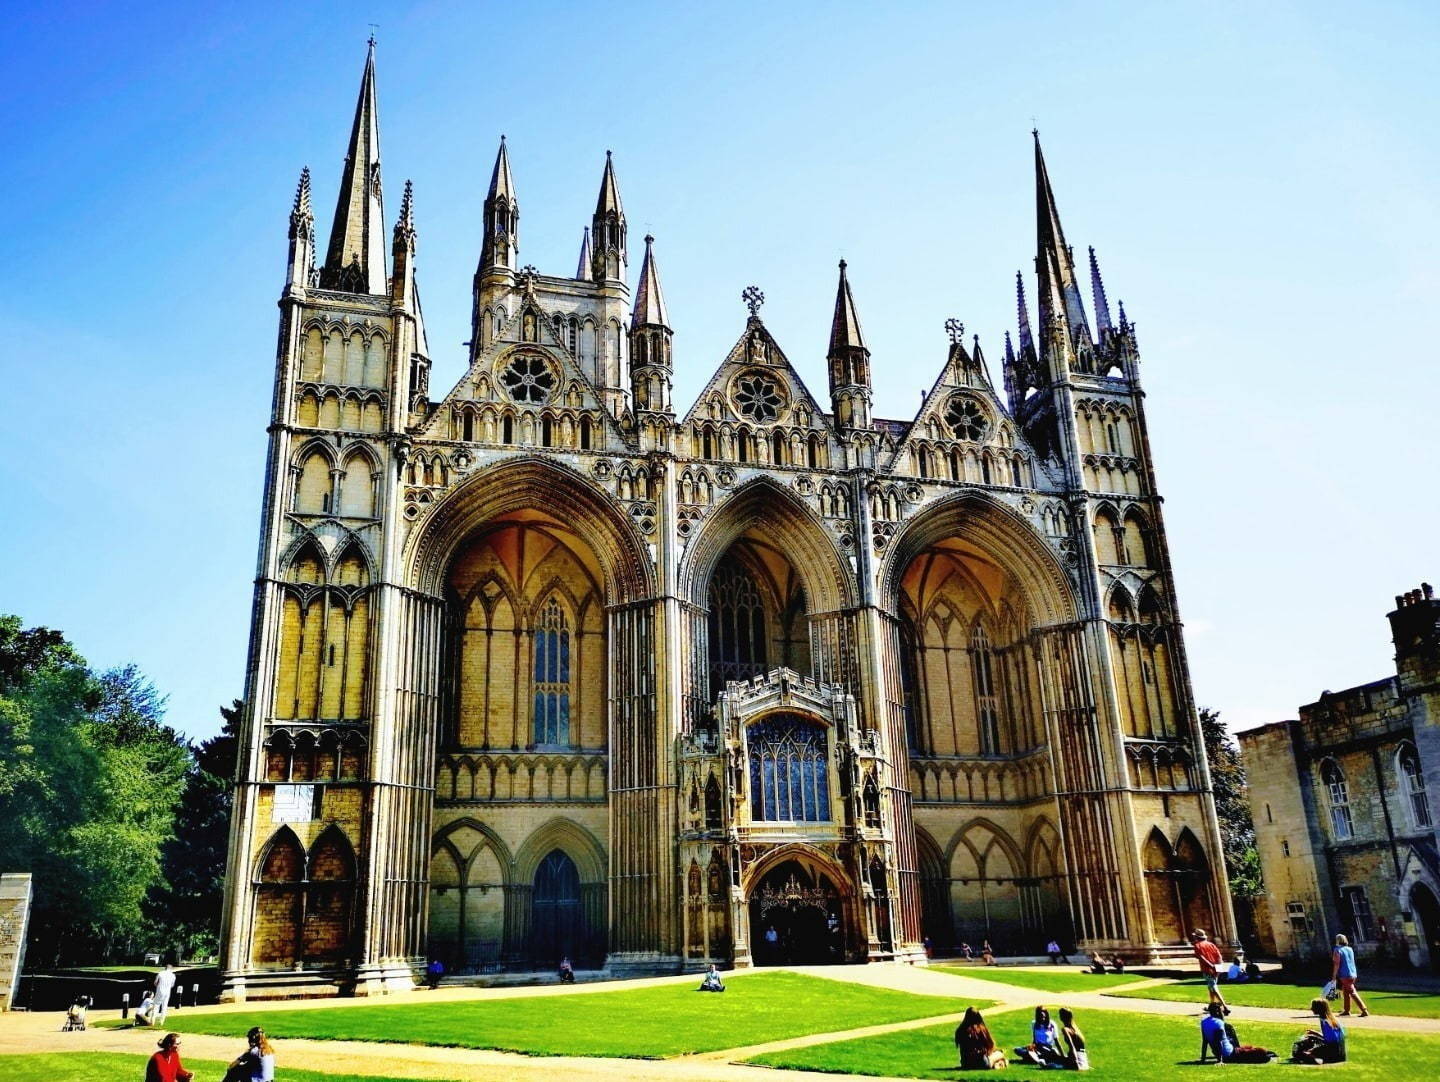 Peterborough Cathedral from the front